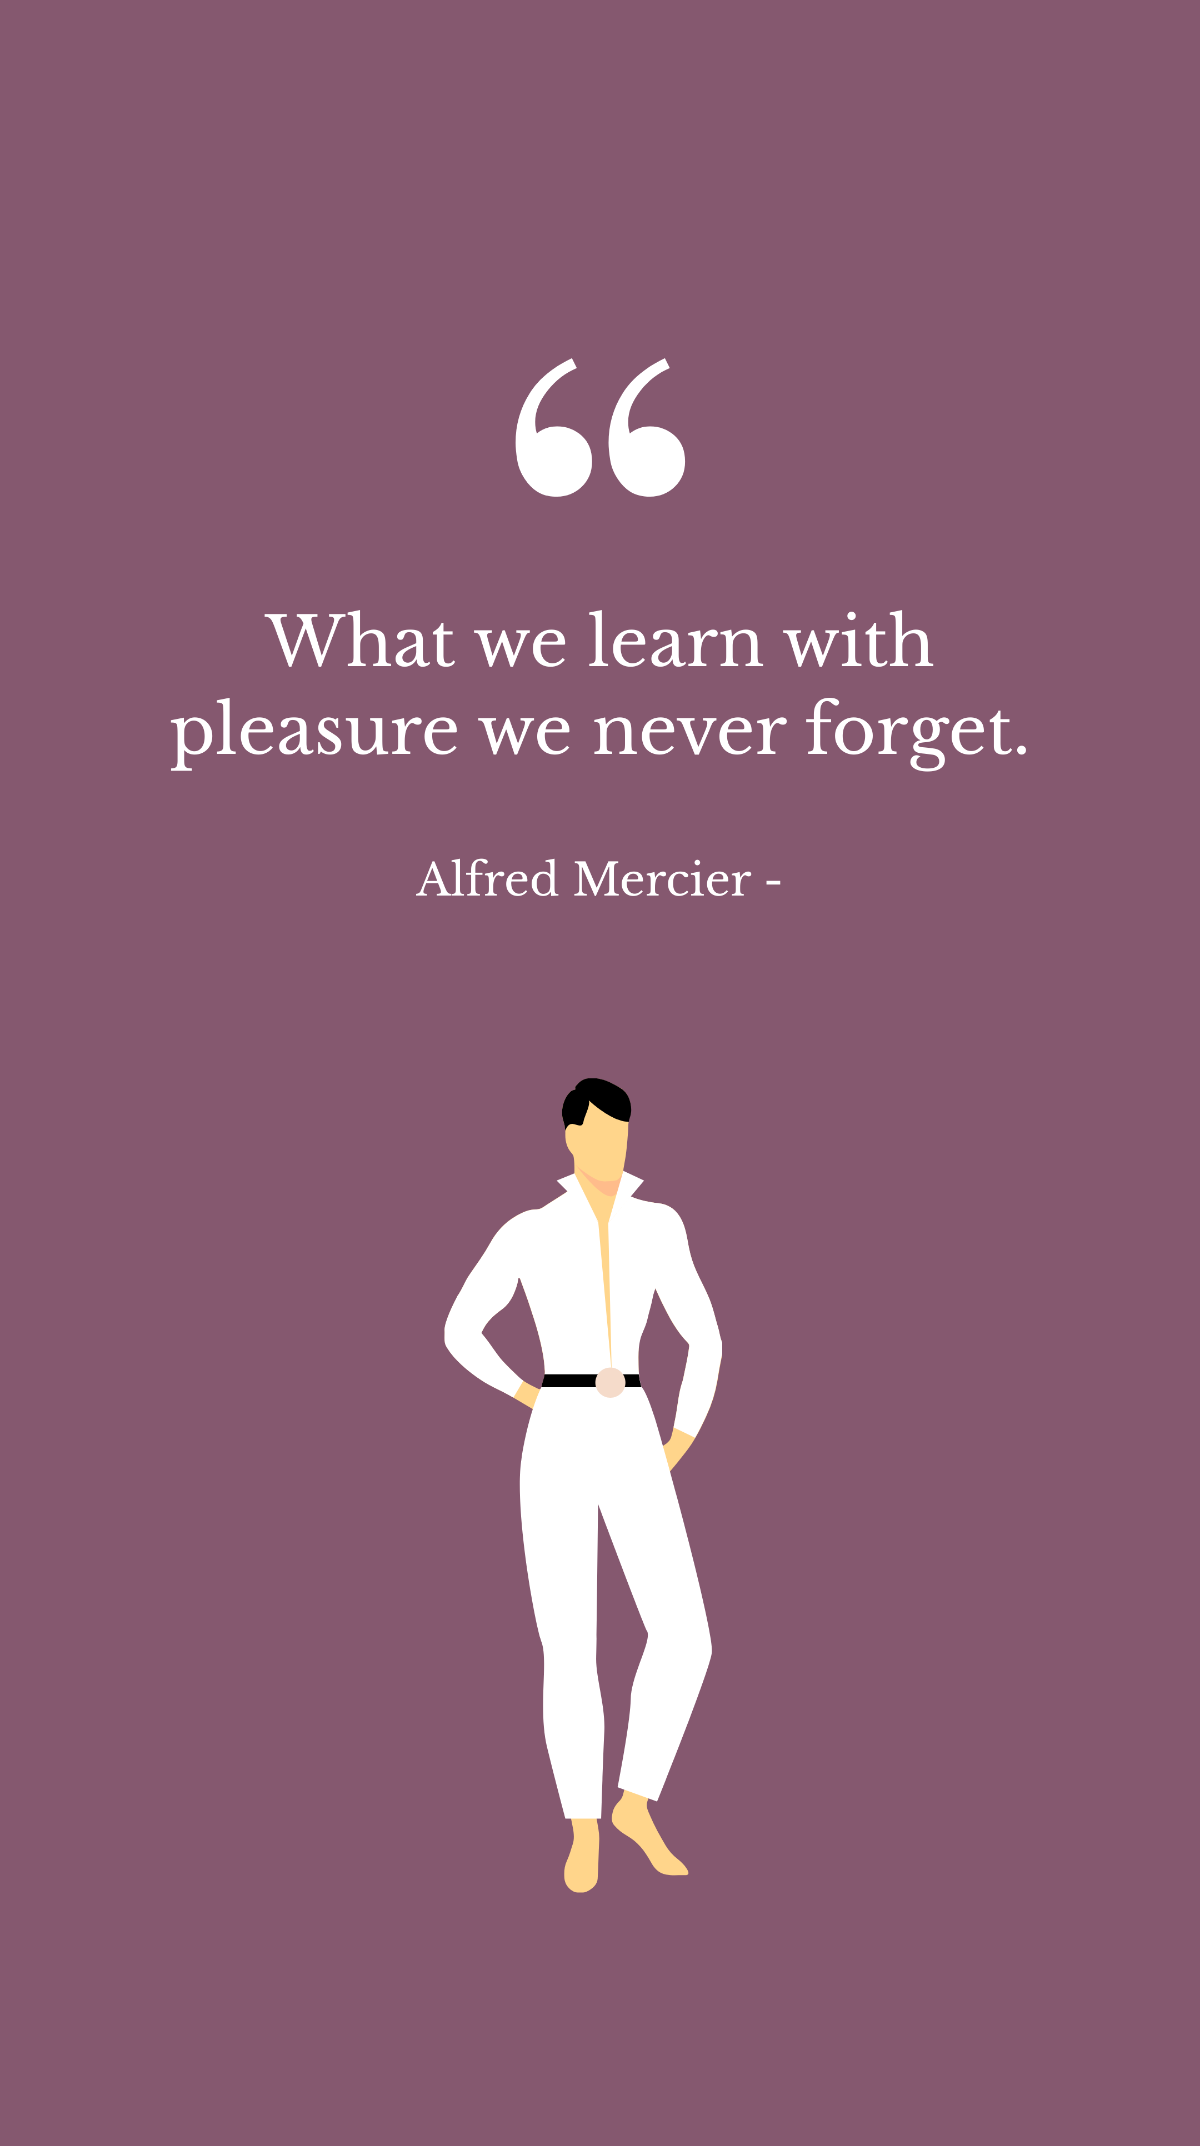 Free Alfred Mercier - What we learn with pleasure we never forget. Template